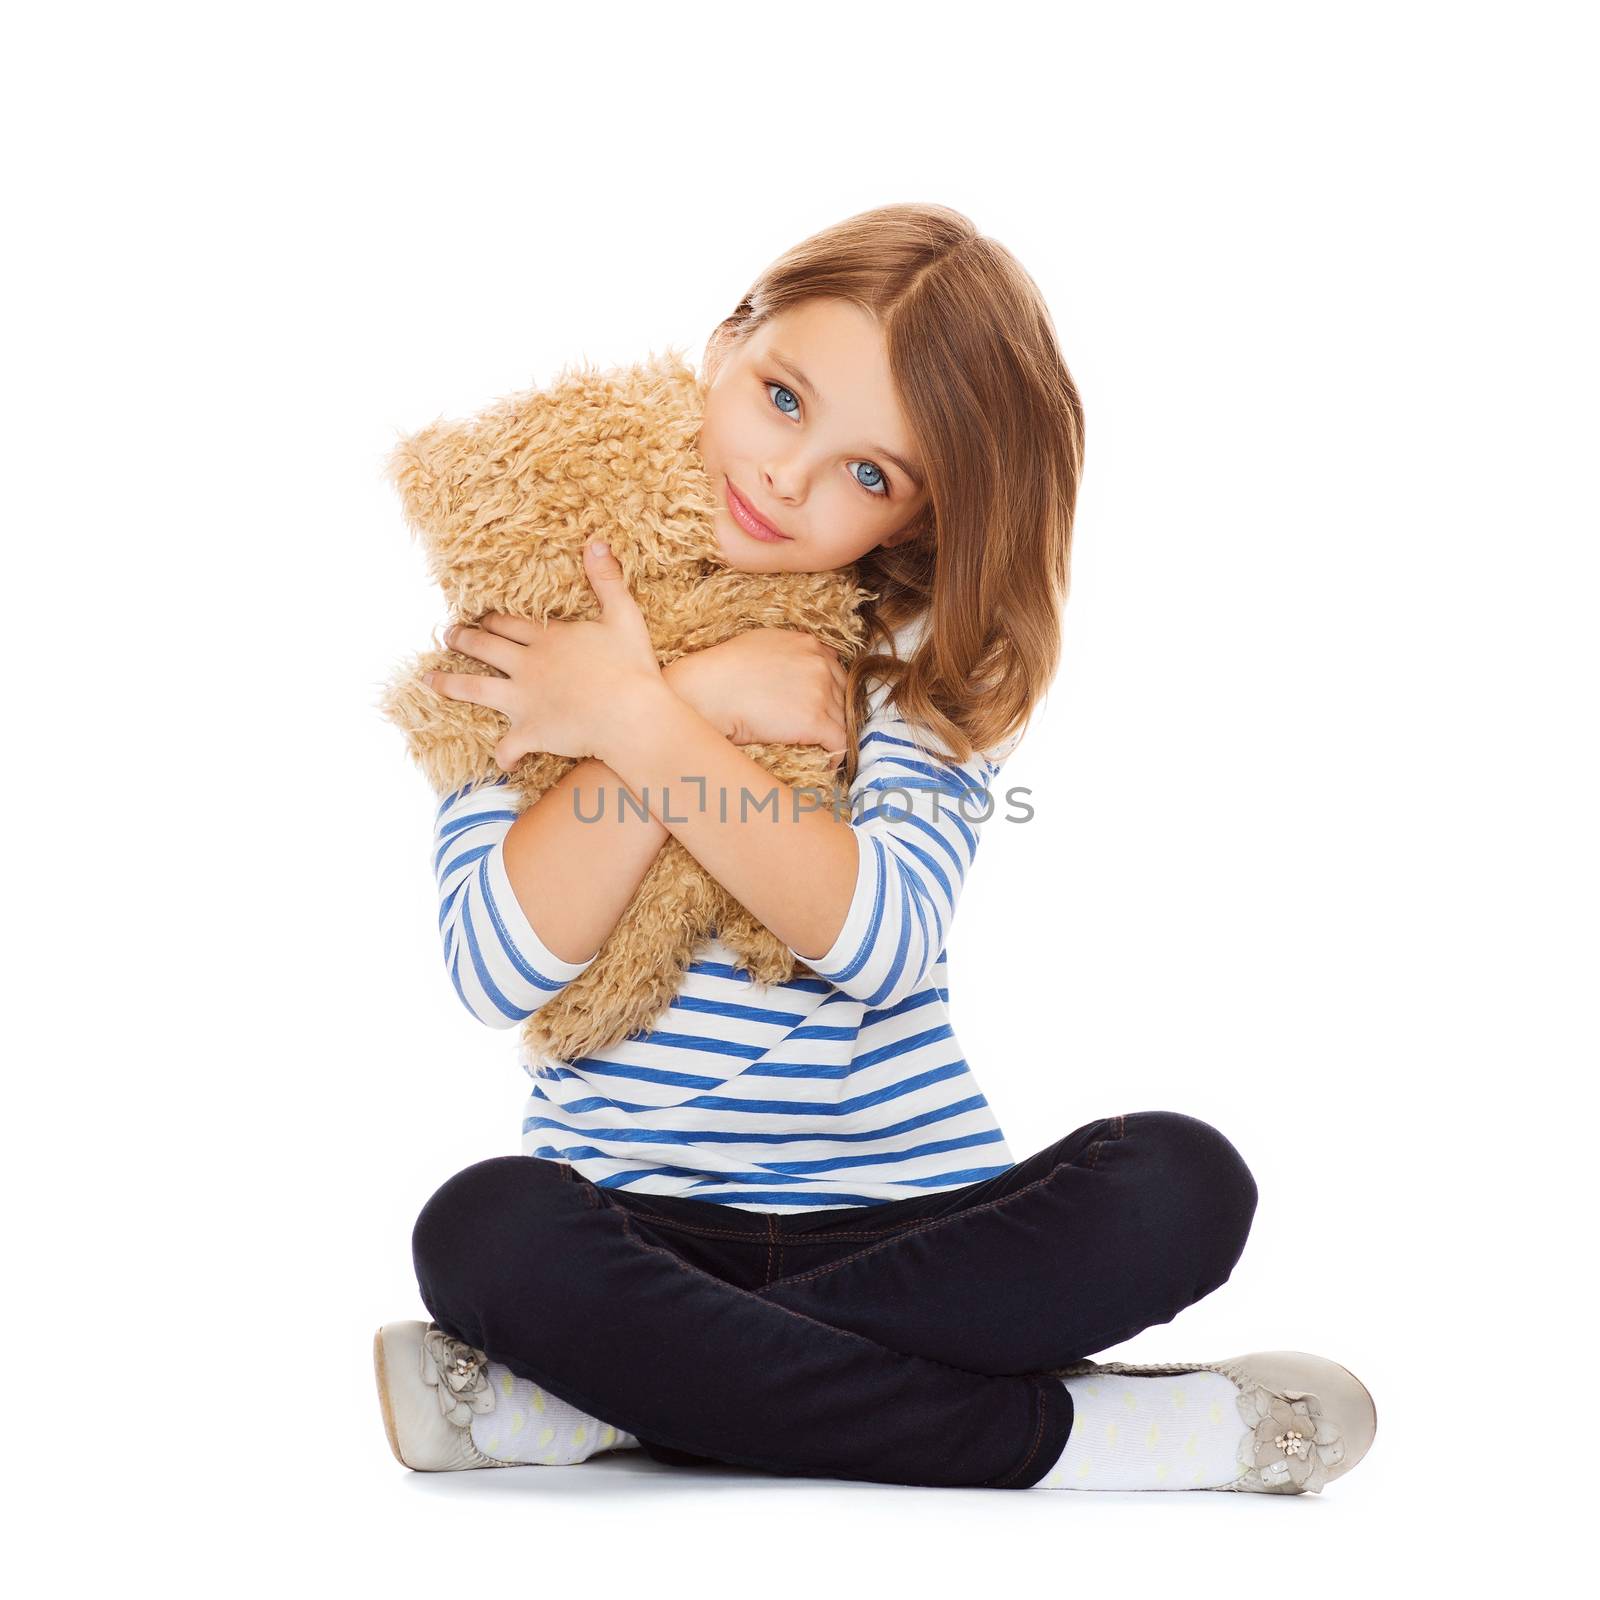 childhood, toys and shopping concept - cute little girl hugging teddy bear